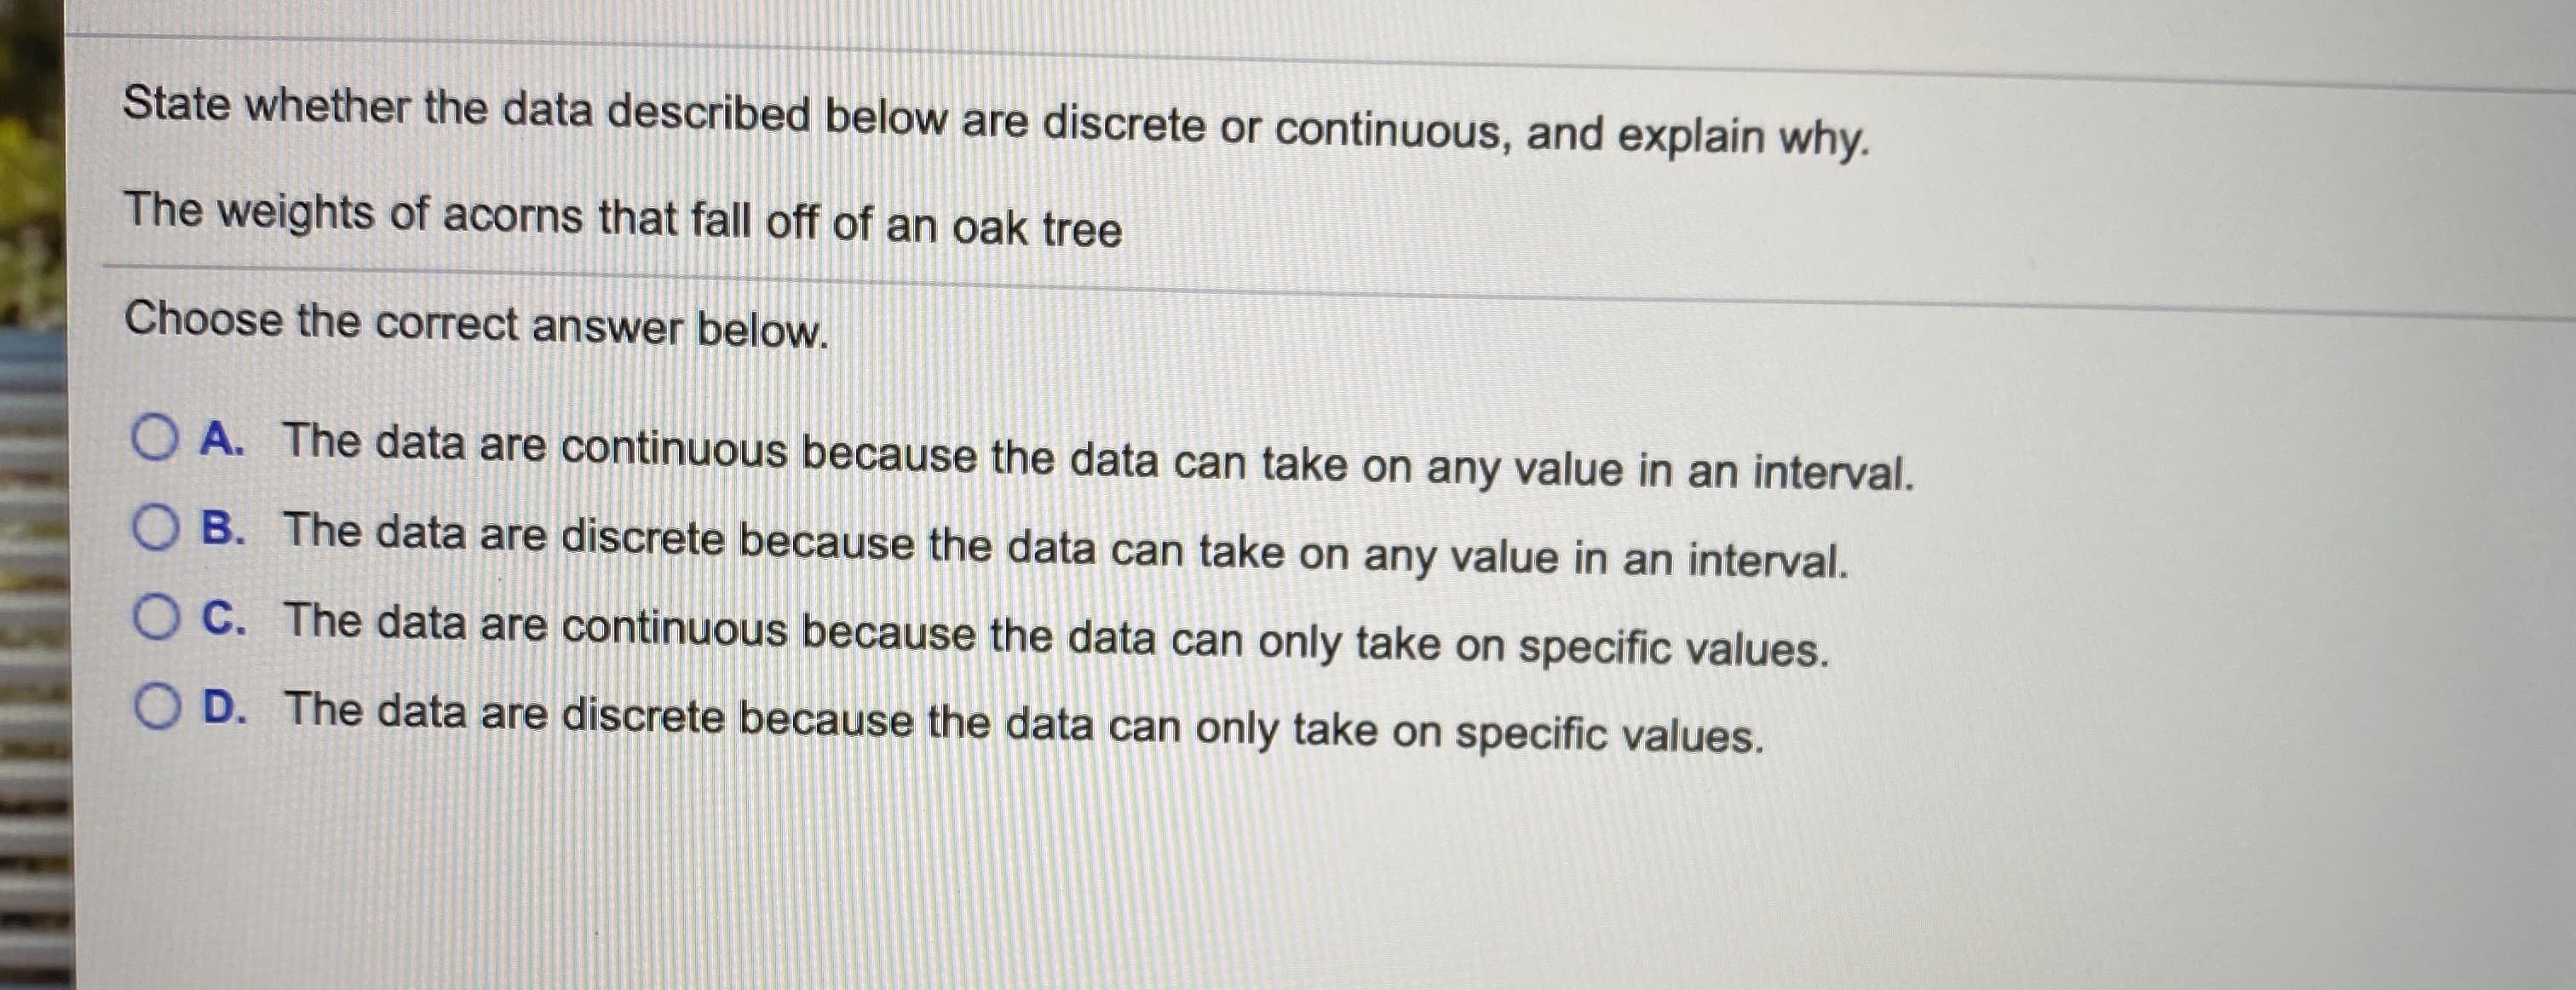 State whether the data described below are discrete or continuous, and explain why.
The weights of acorns that fall off of an oak tree
Choose the correct answer below.
O A. The data are continuous because the data can take on any value in an interval.
O B. The data are discrete because the data can take on any value in an interval.
O C. The data are continuous because the data can only take on specific values.
O D. The data are discrete because the data can only take on specific values.
